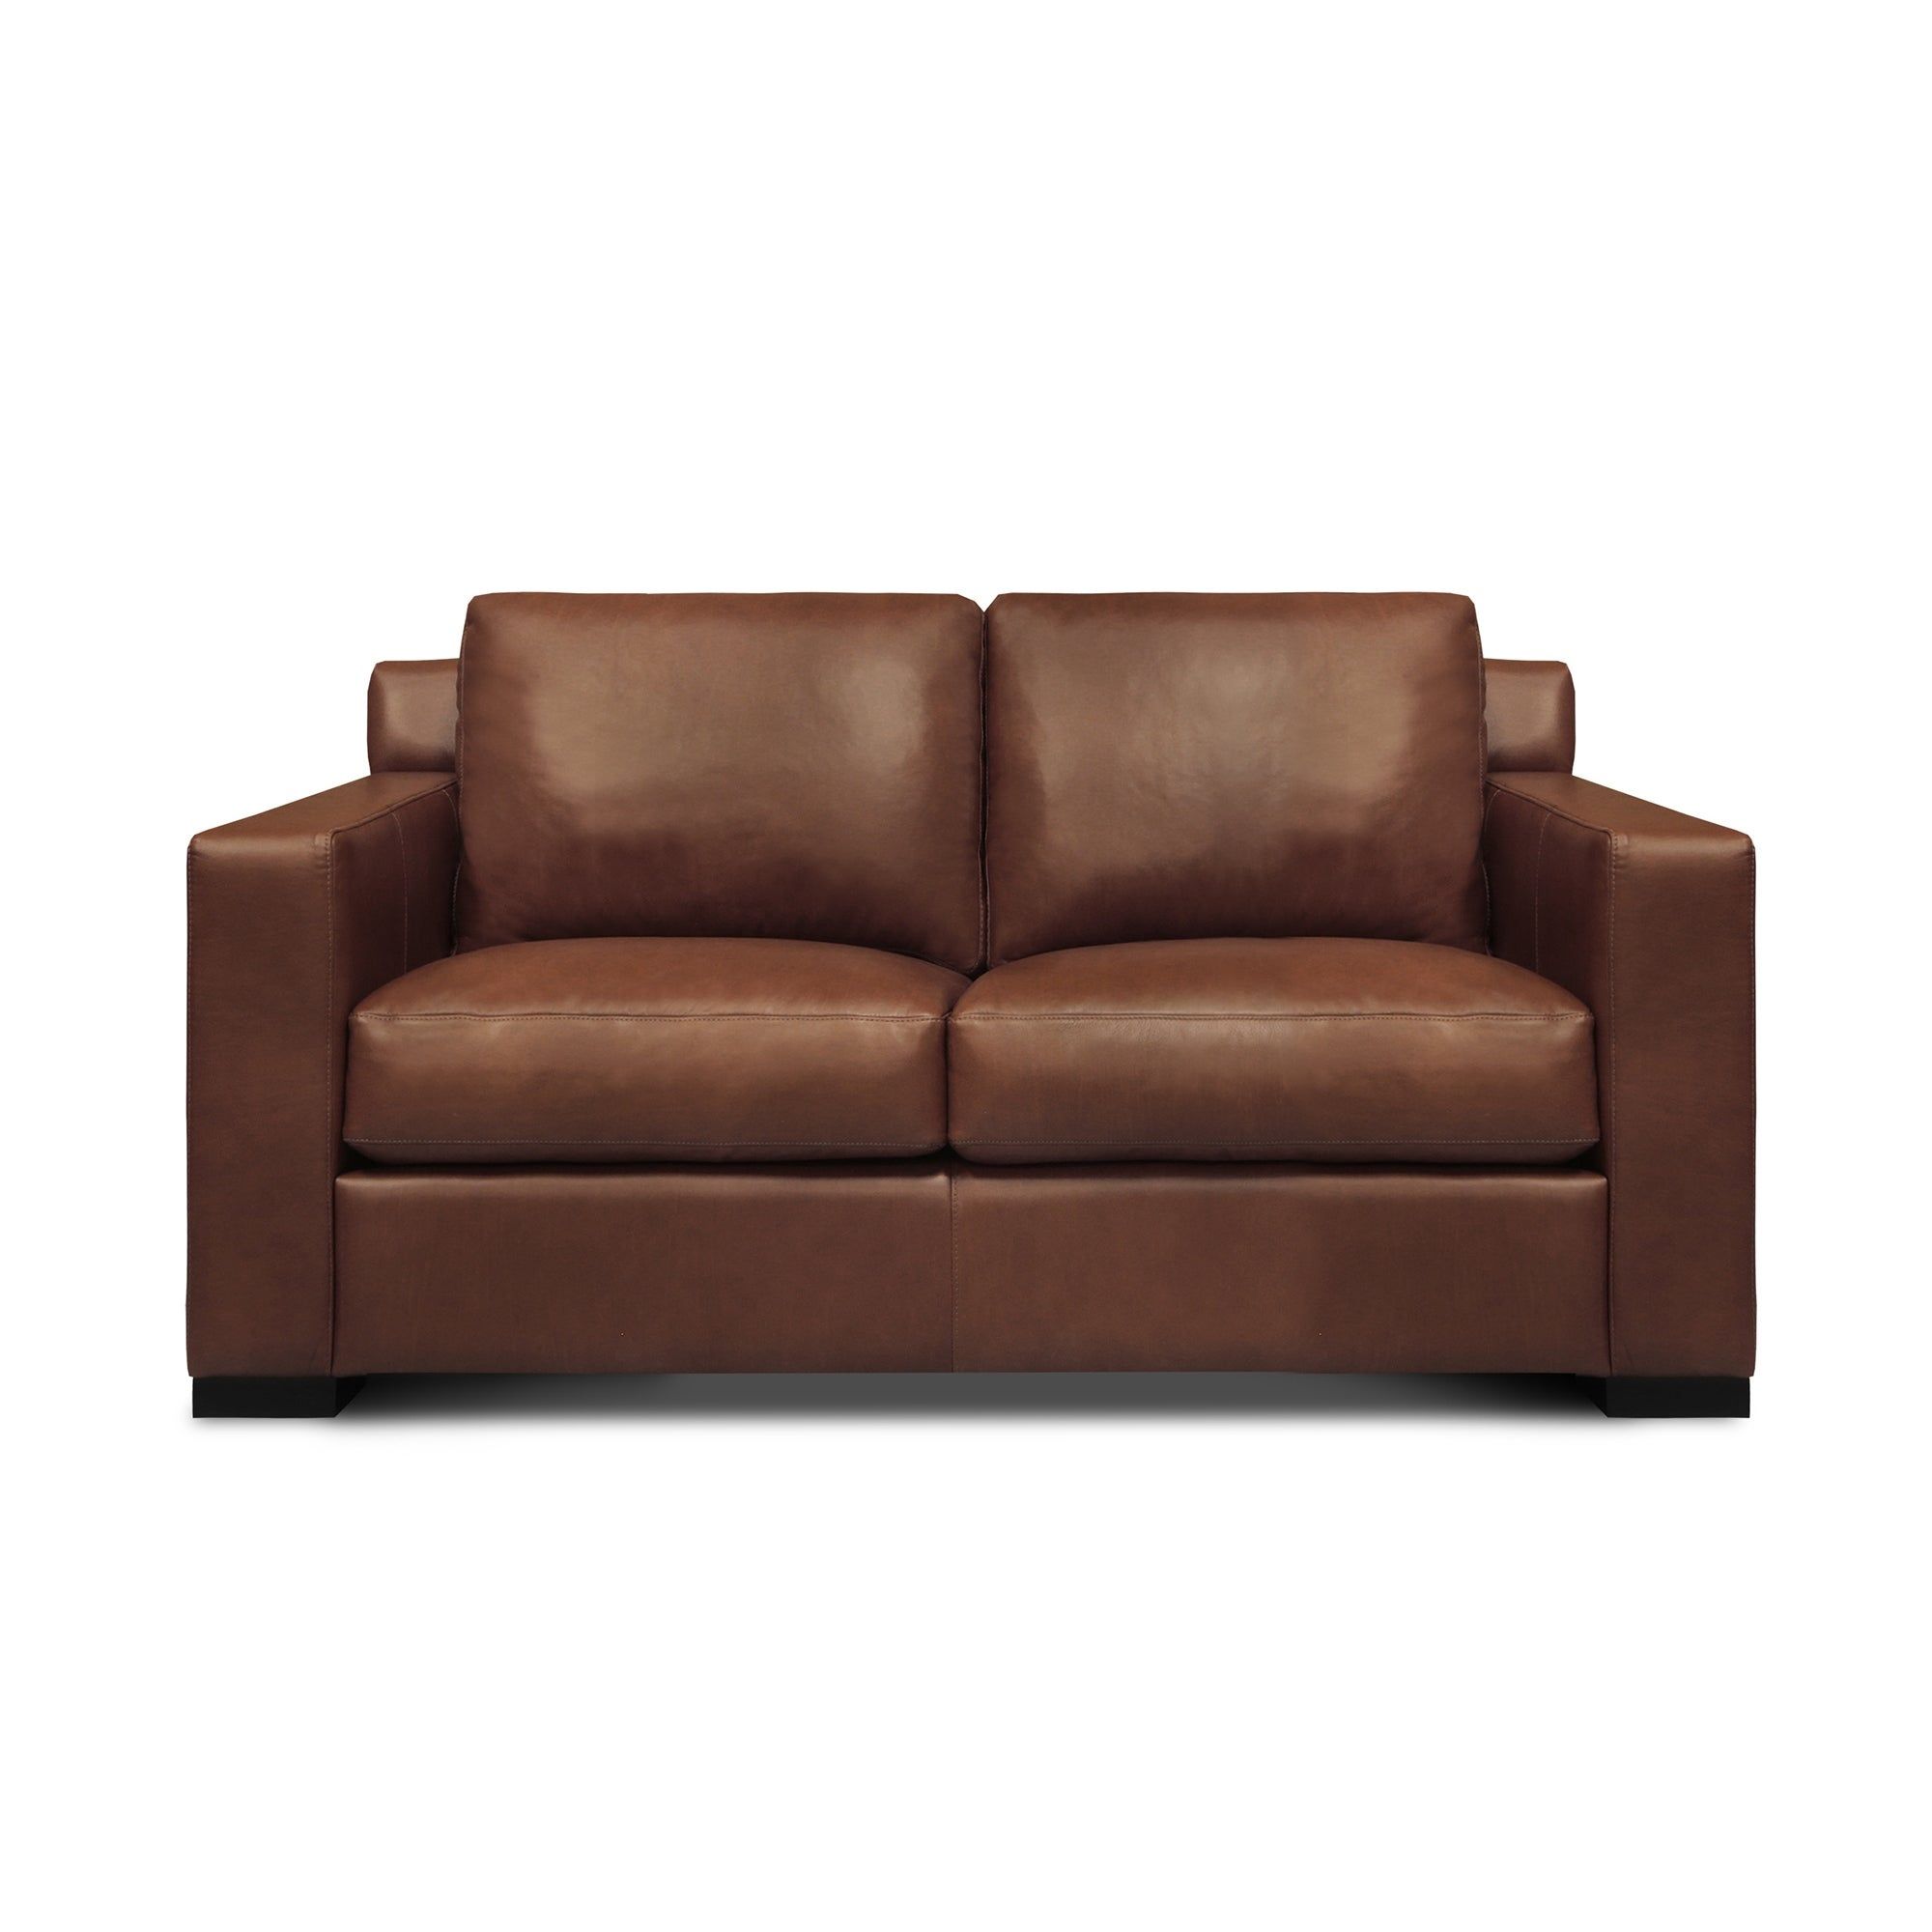 100 Top Grain Italian Leather Sofa Chaise Lucca American Throughout [%Matilda 100% Top Grain Leather Chaise Sectional Sofas|Matilda 100% Top Grain Leather Chaise Sectional Sofas%] (View 1 of 15)